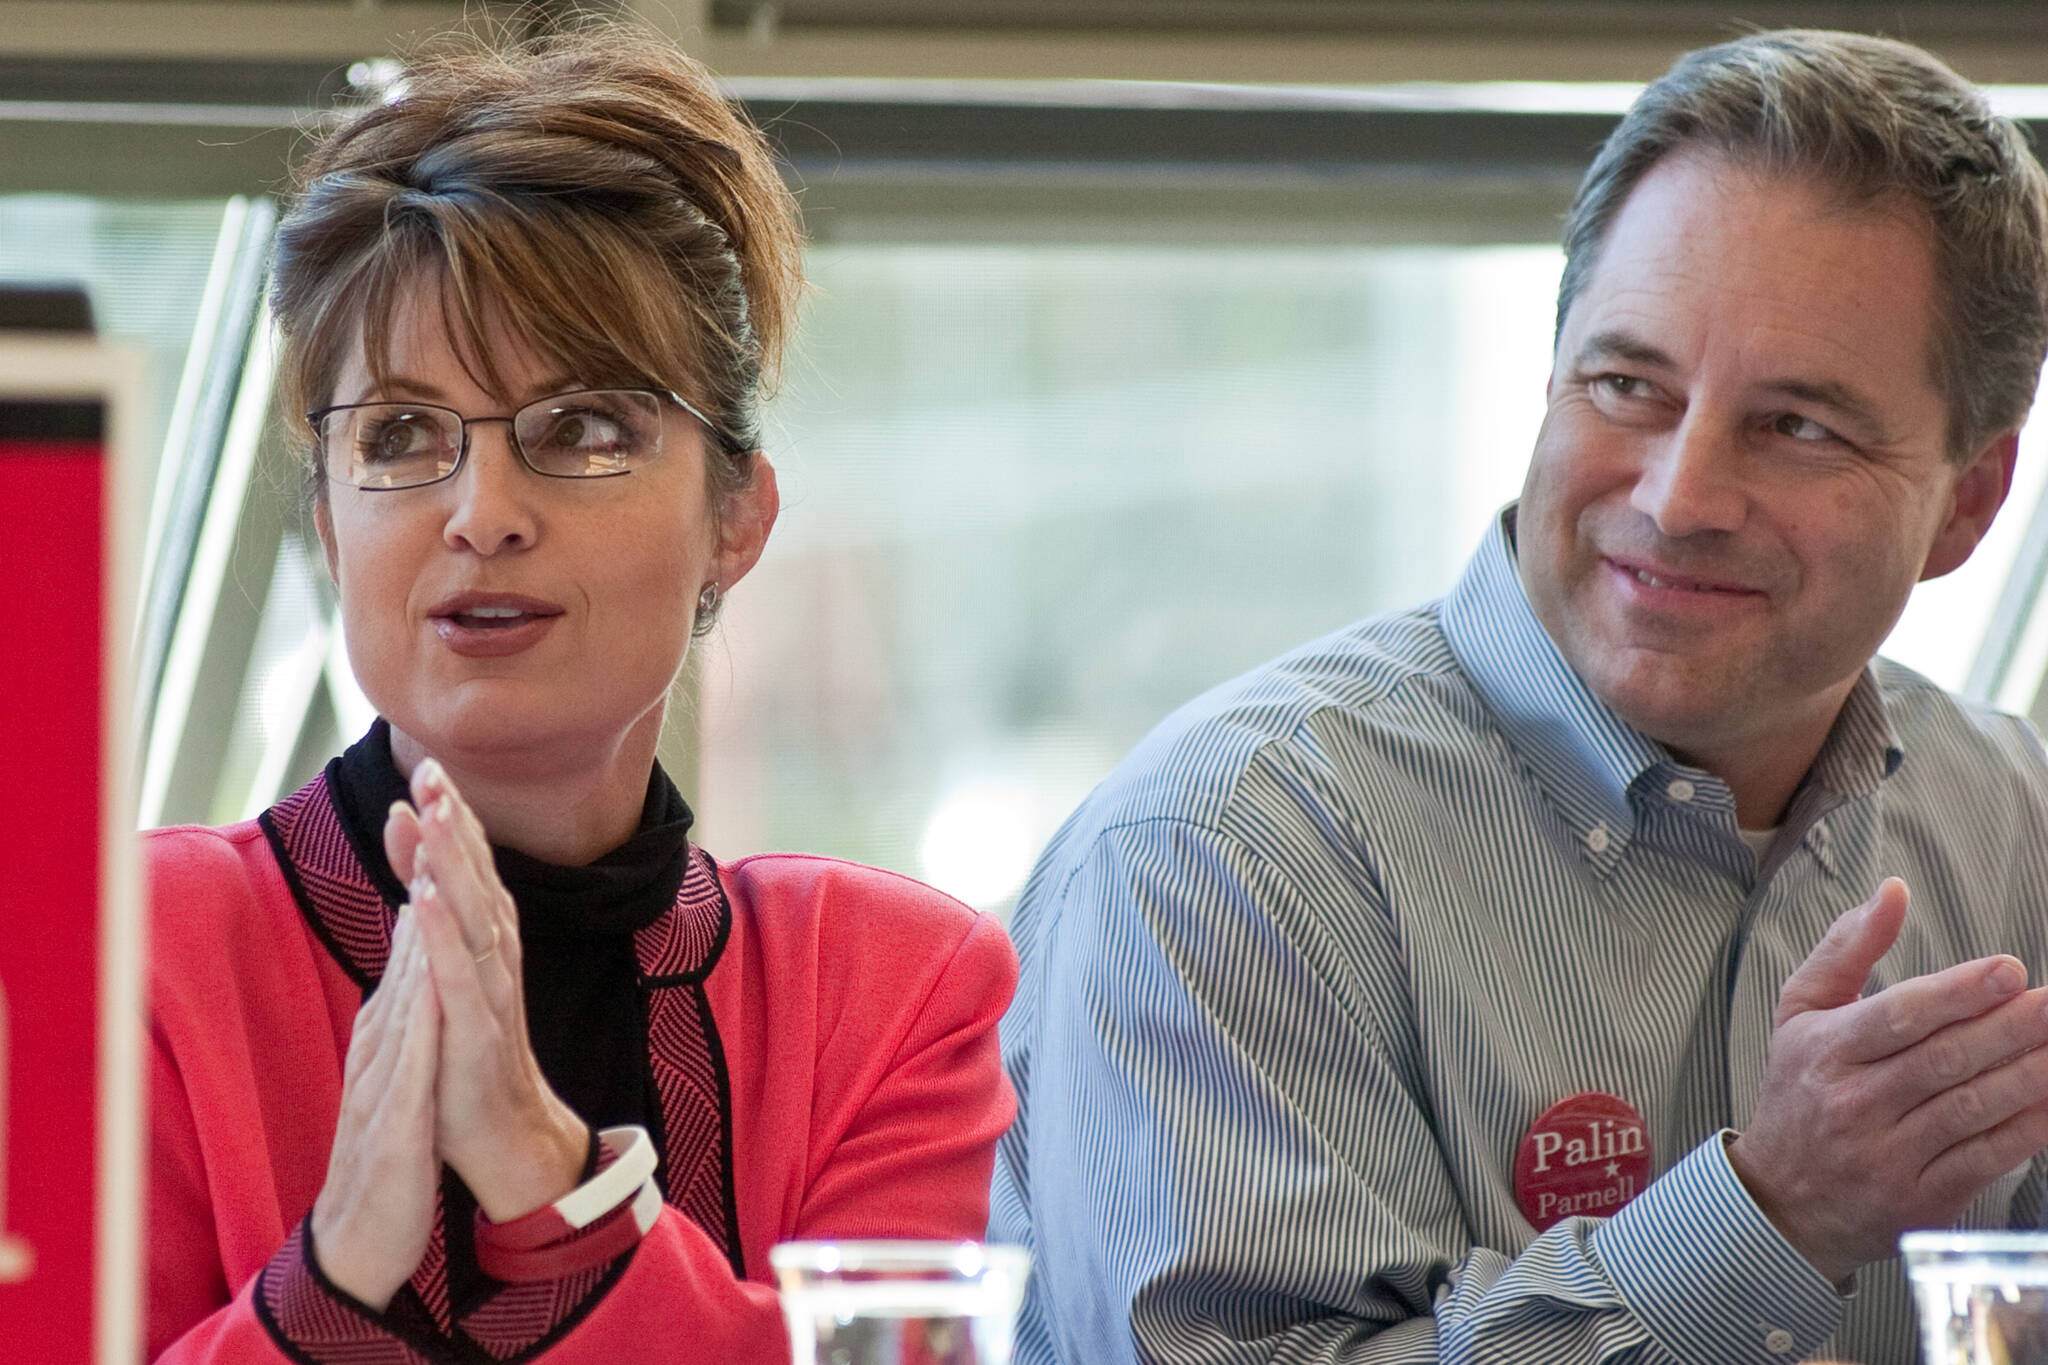 Then-candidate for governor Sarah Palin and running mate Sean Parnell listen to introductions during a Capital City Republican Women's luncheon at the UAS Recreation Center in September 2006. Palin is now running for Congress and has been endorsed by former President Donald Trump. (Michael Penn / Juneau Empire File)